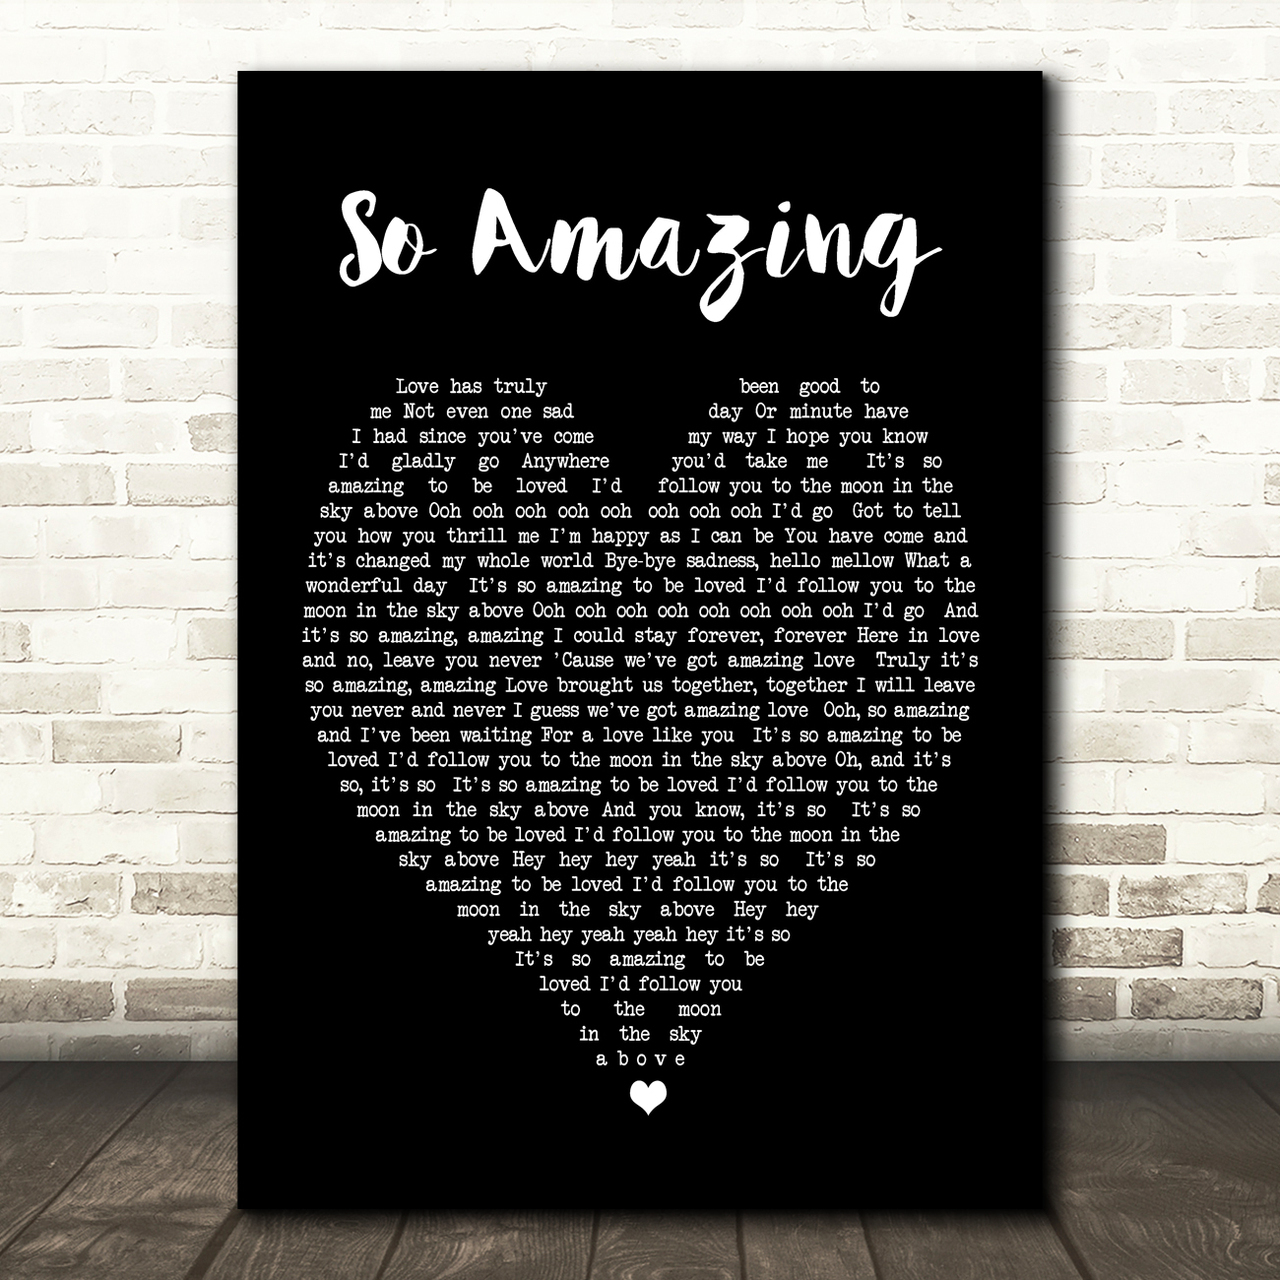 So Amazing Luther Vandross Black Heart Song Lyric Quote Print